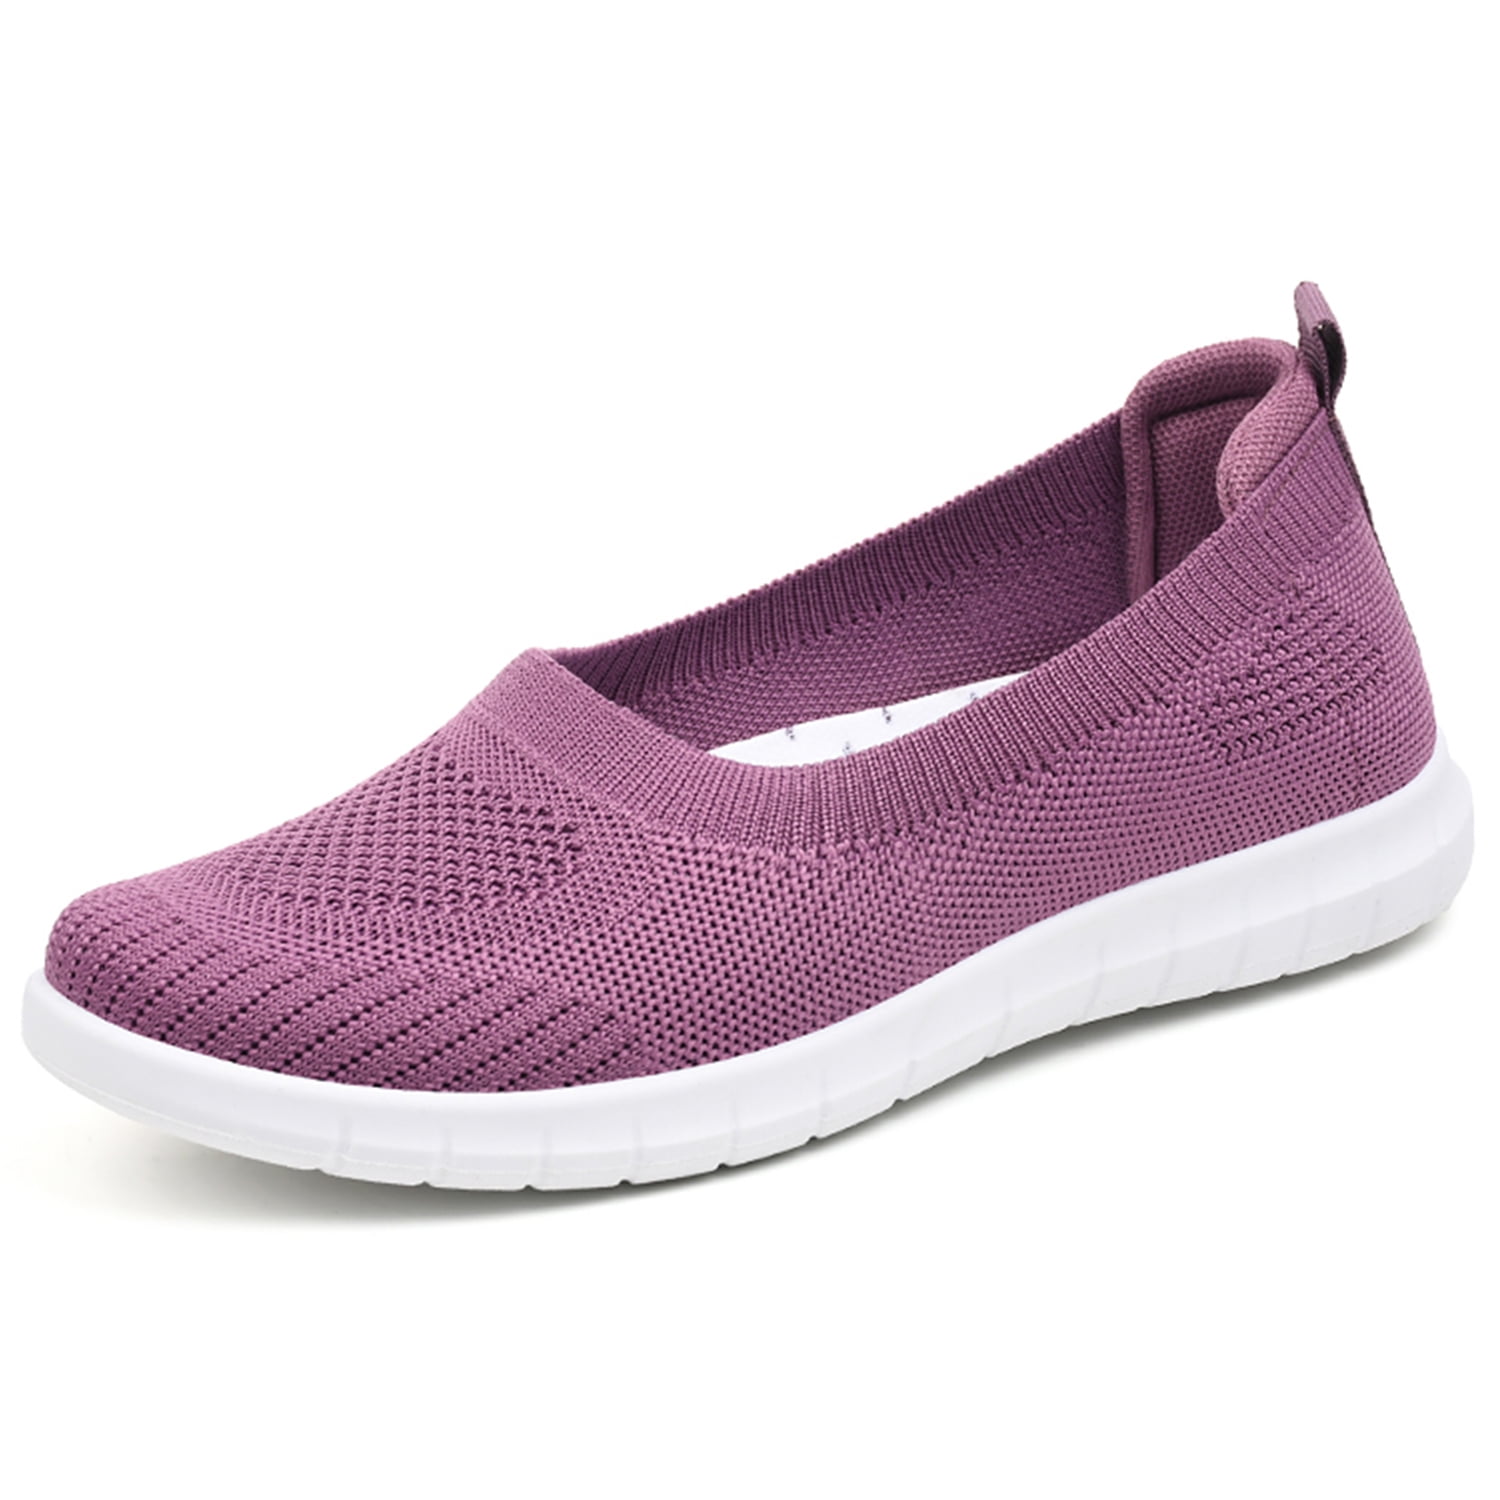 Ablanczoom Loafer Flats for Women Ladies Fashion Casual Soft Sole ...